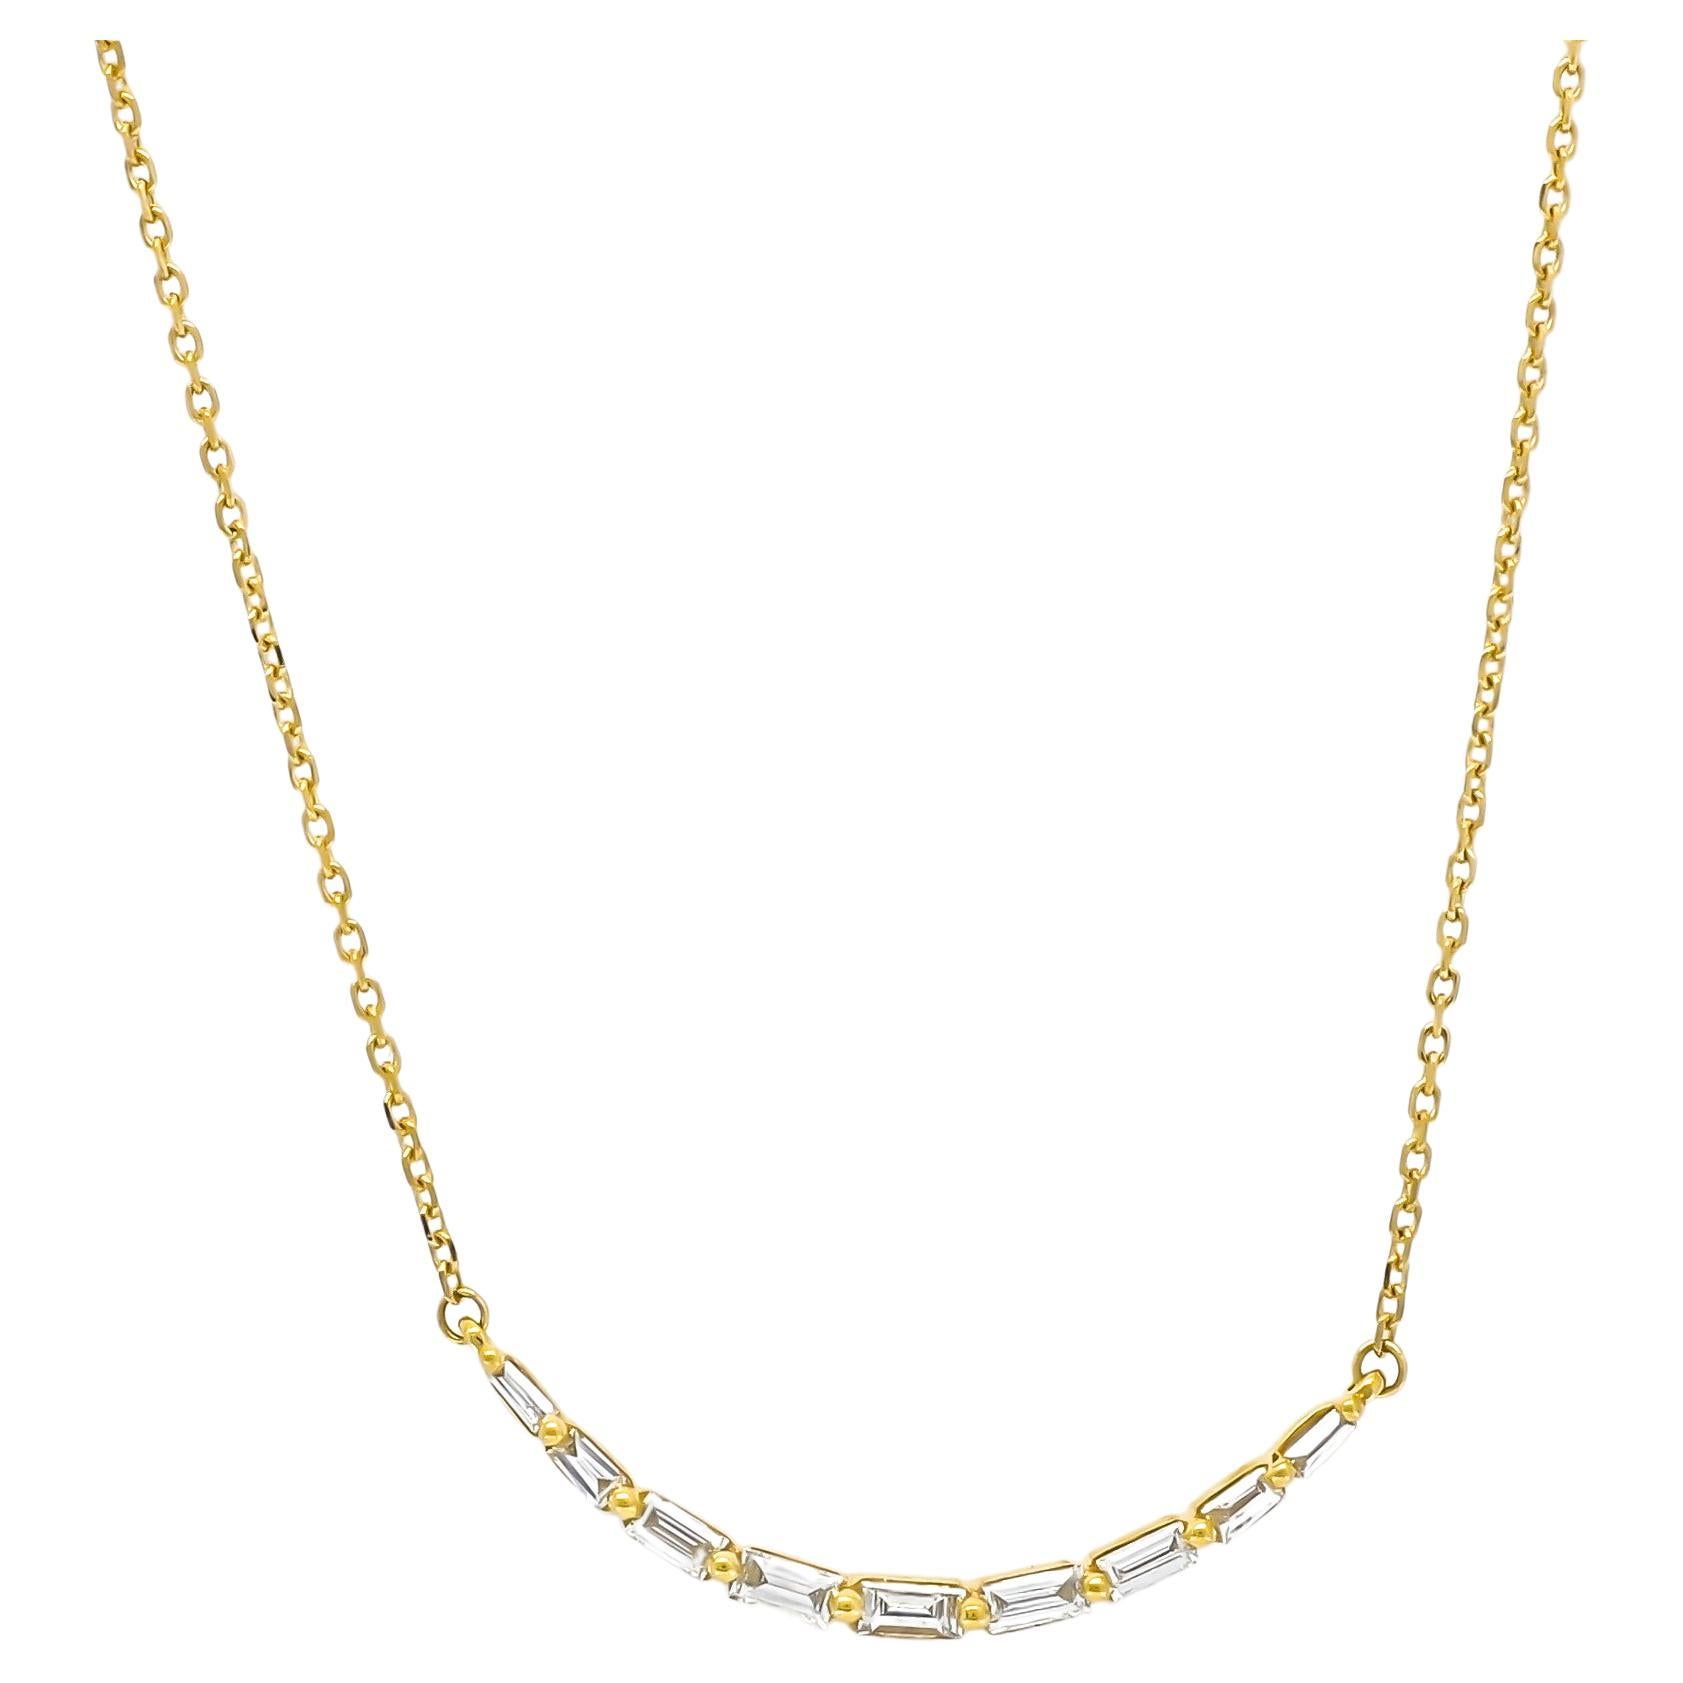 Natural Diamonds Necklace 0.25 cts 18KT Yellow Gold Single Row Baguette Necklace For Sale